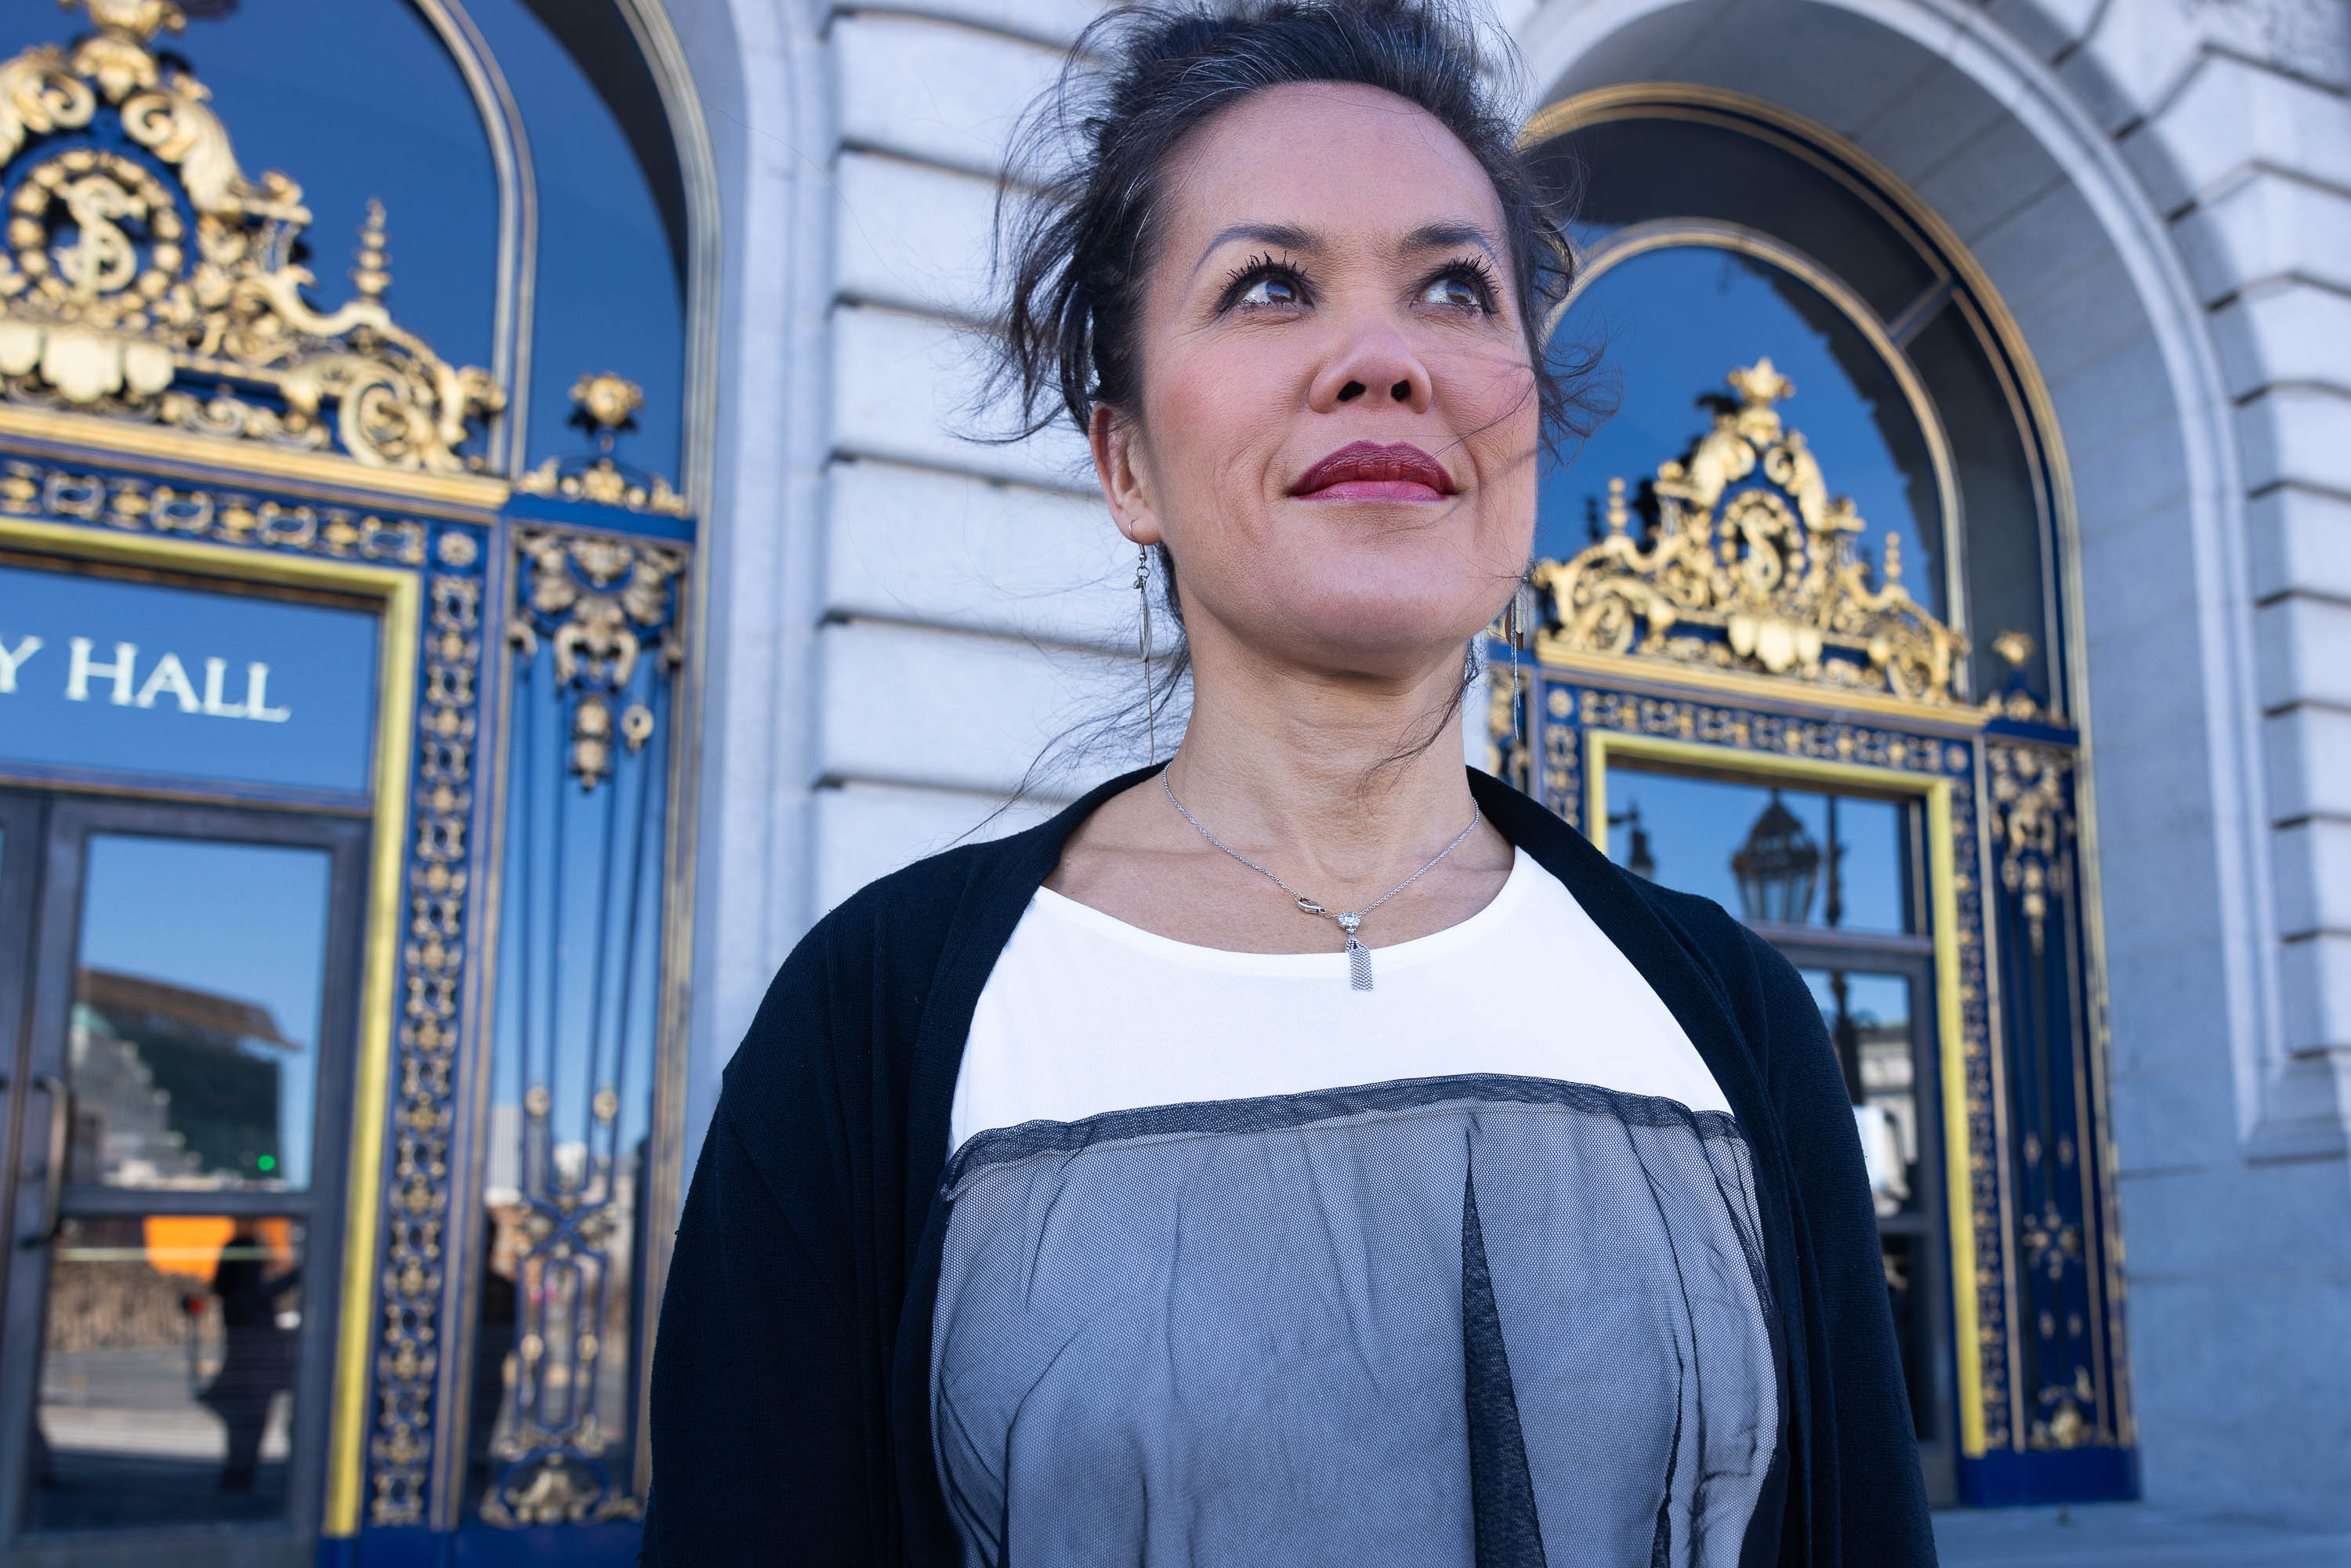 A woman stands before an ornate building with golden detailing, gazing upward thoughtfully.